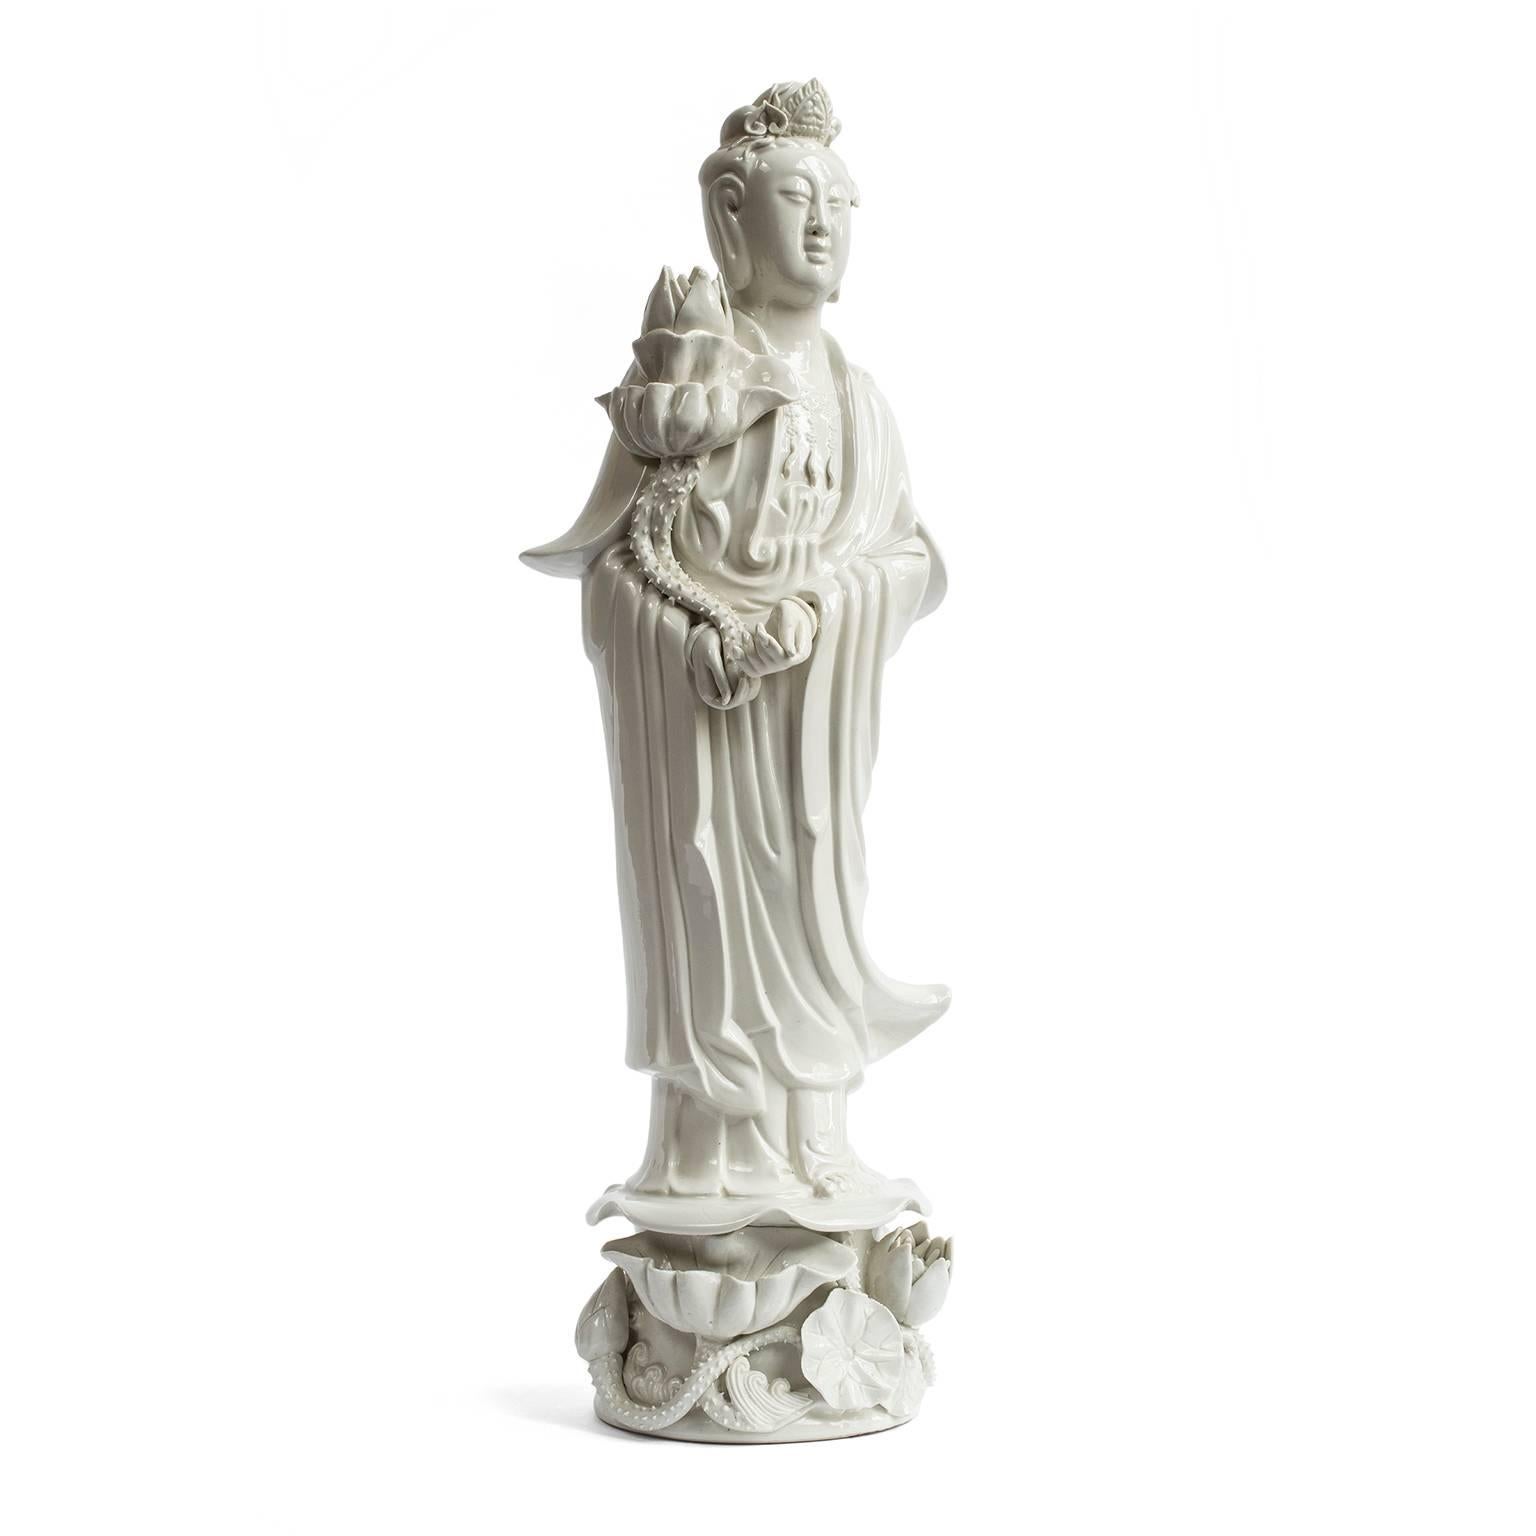 Guan Yin is a bodhisattva who is sometimes called the Goddess of Mercy. This very fine and intricate pair of early 20th C. Blanc de Chine figures of the goddess are in impeccable condition given their age. This type of
porcelain is made from